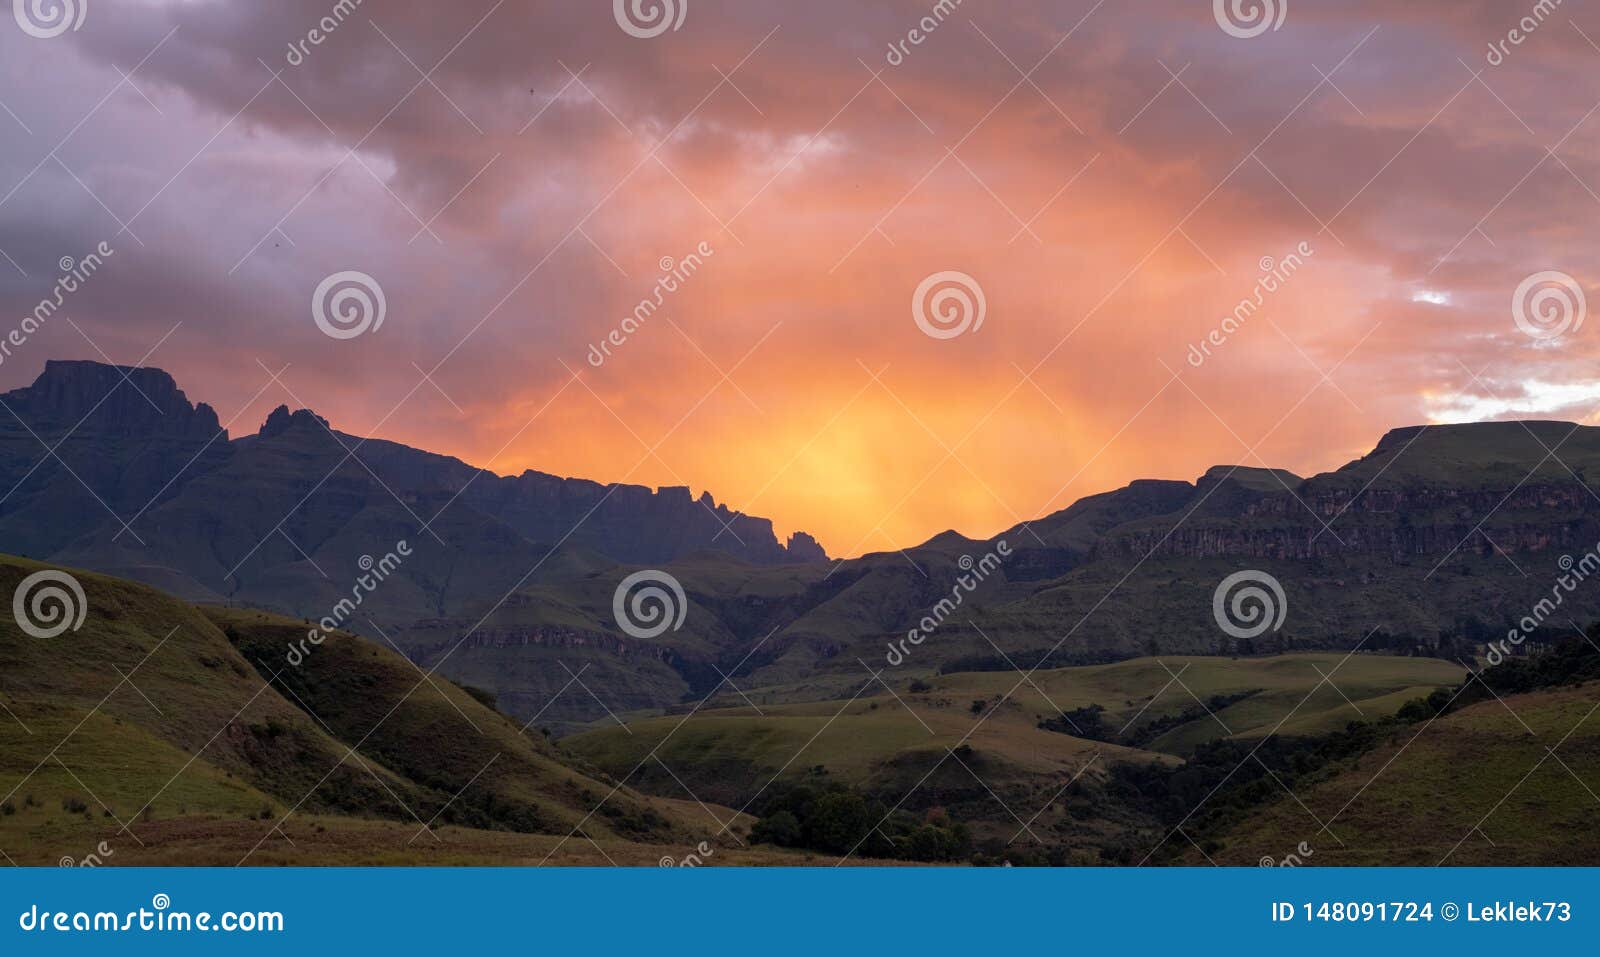 champagne valley near winterton at sunrise, forming part of the central drakensberg mountain range, kwazulu natal, south africa.